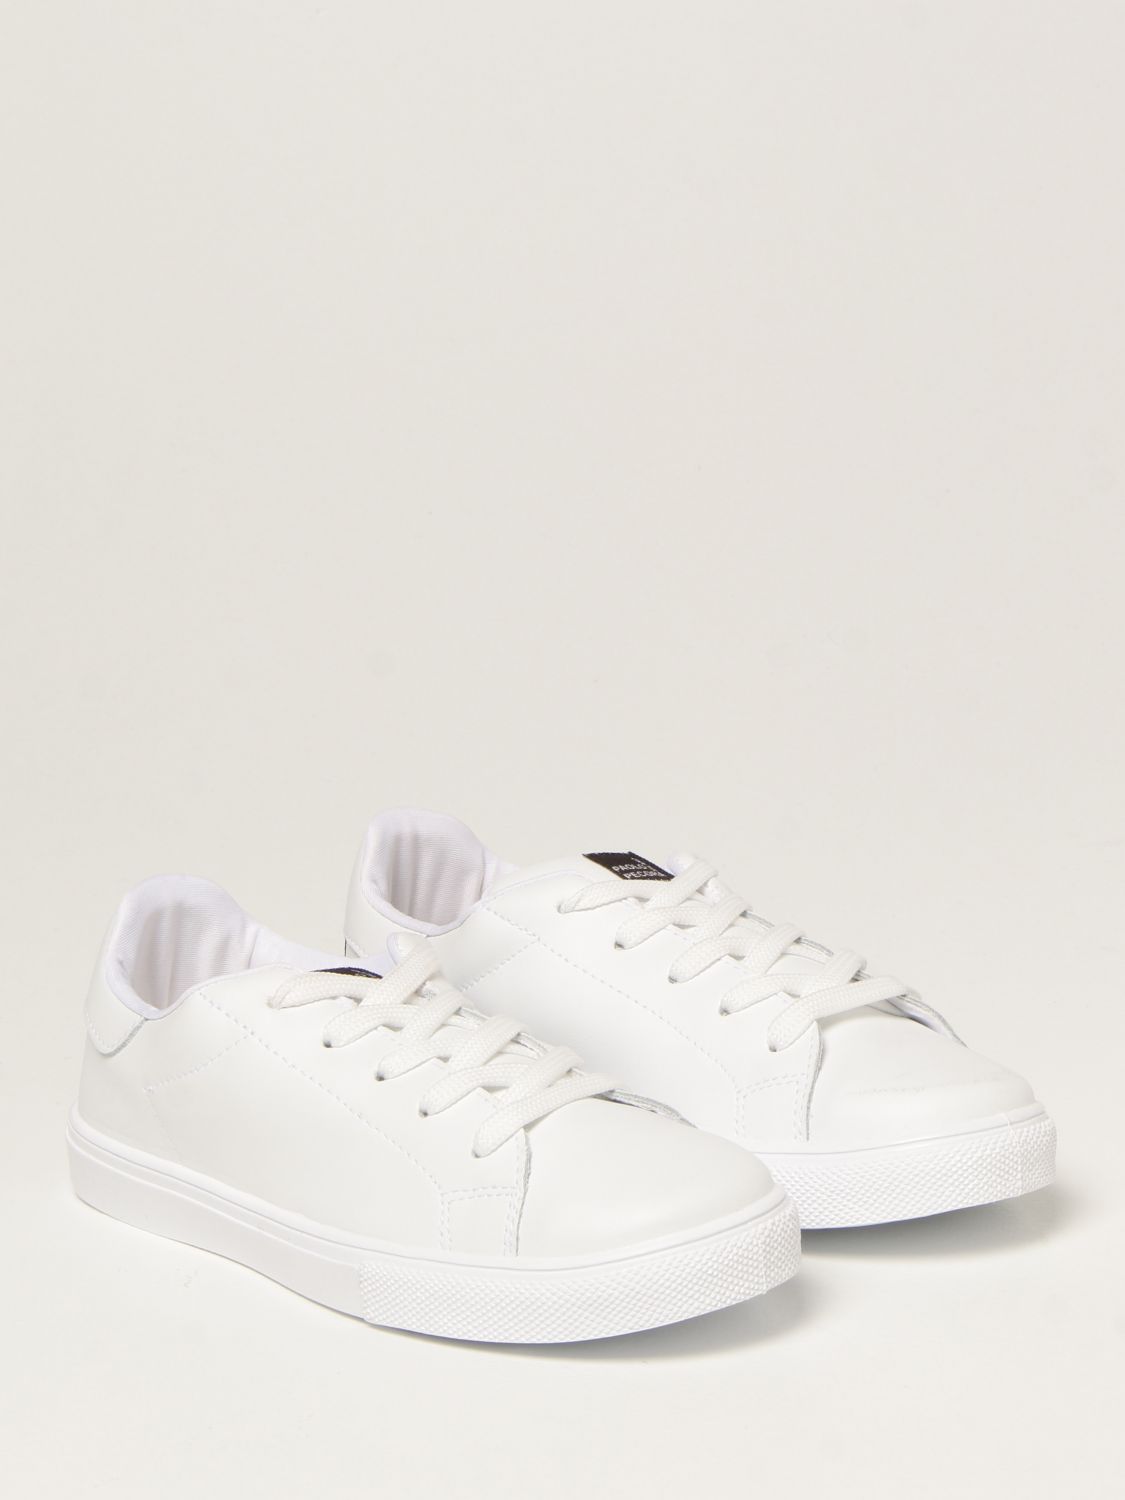 Chaussures Paolo Pecora: Chaussures enfant Paolo Pecora blanc 1 2